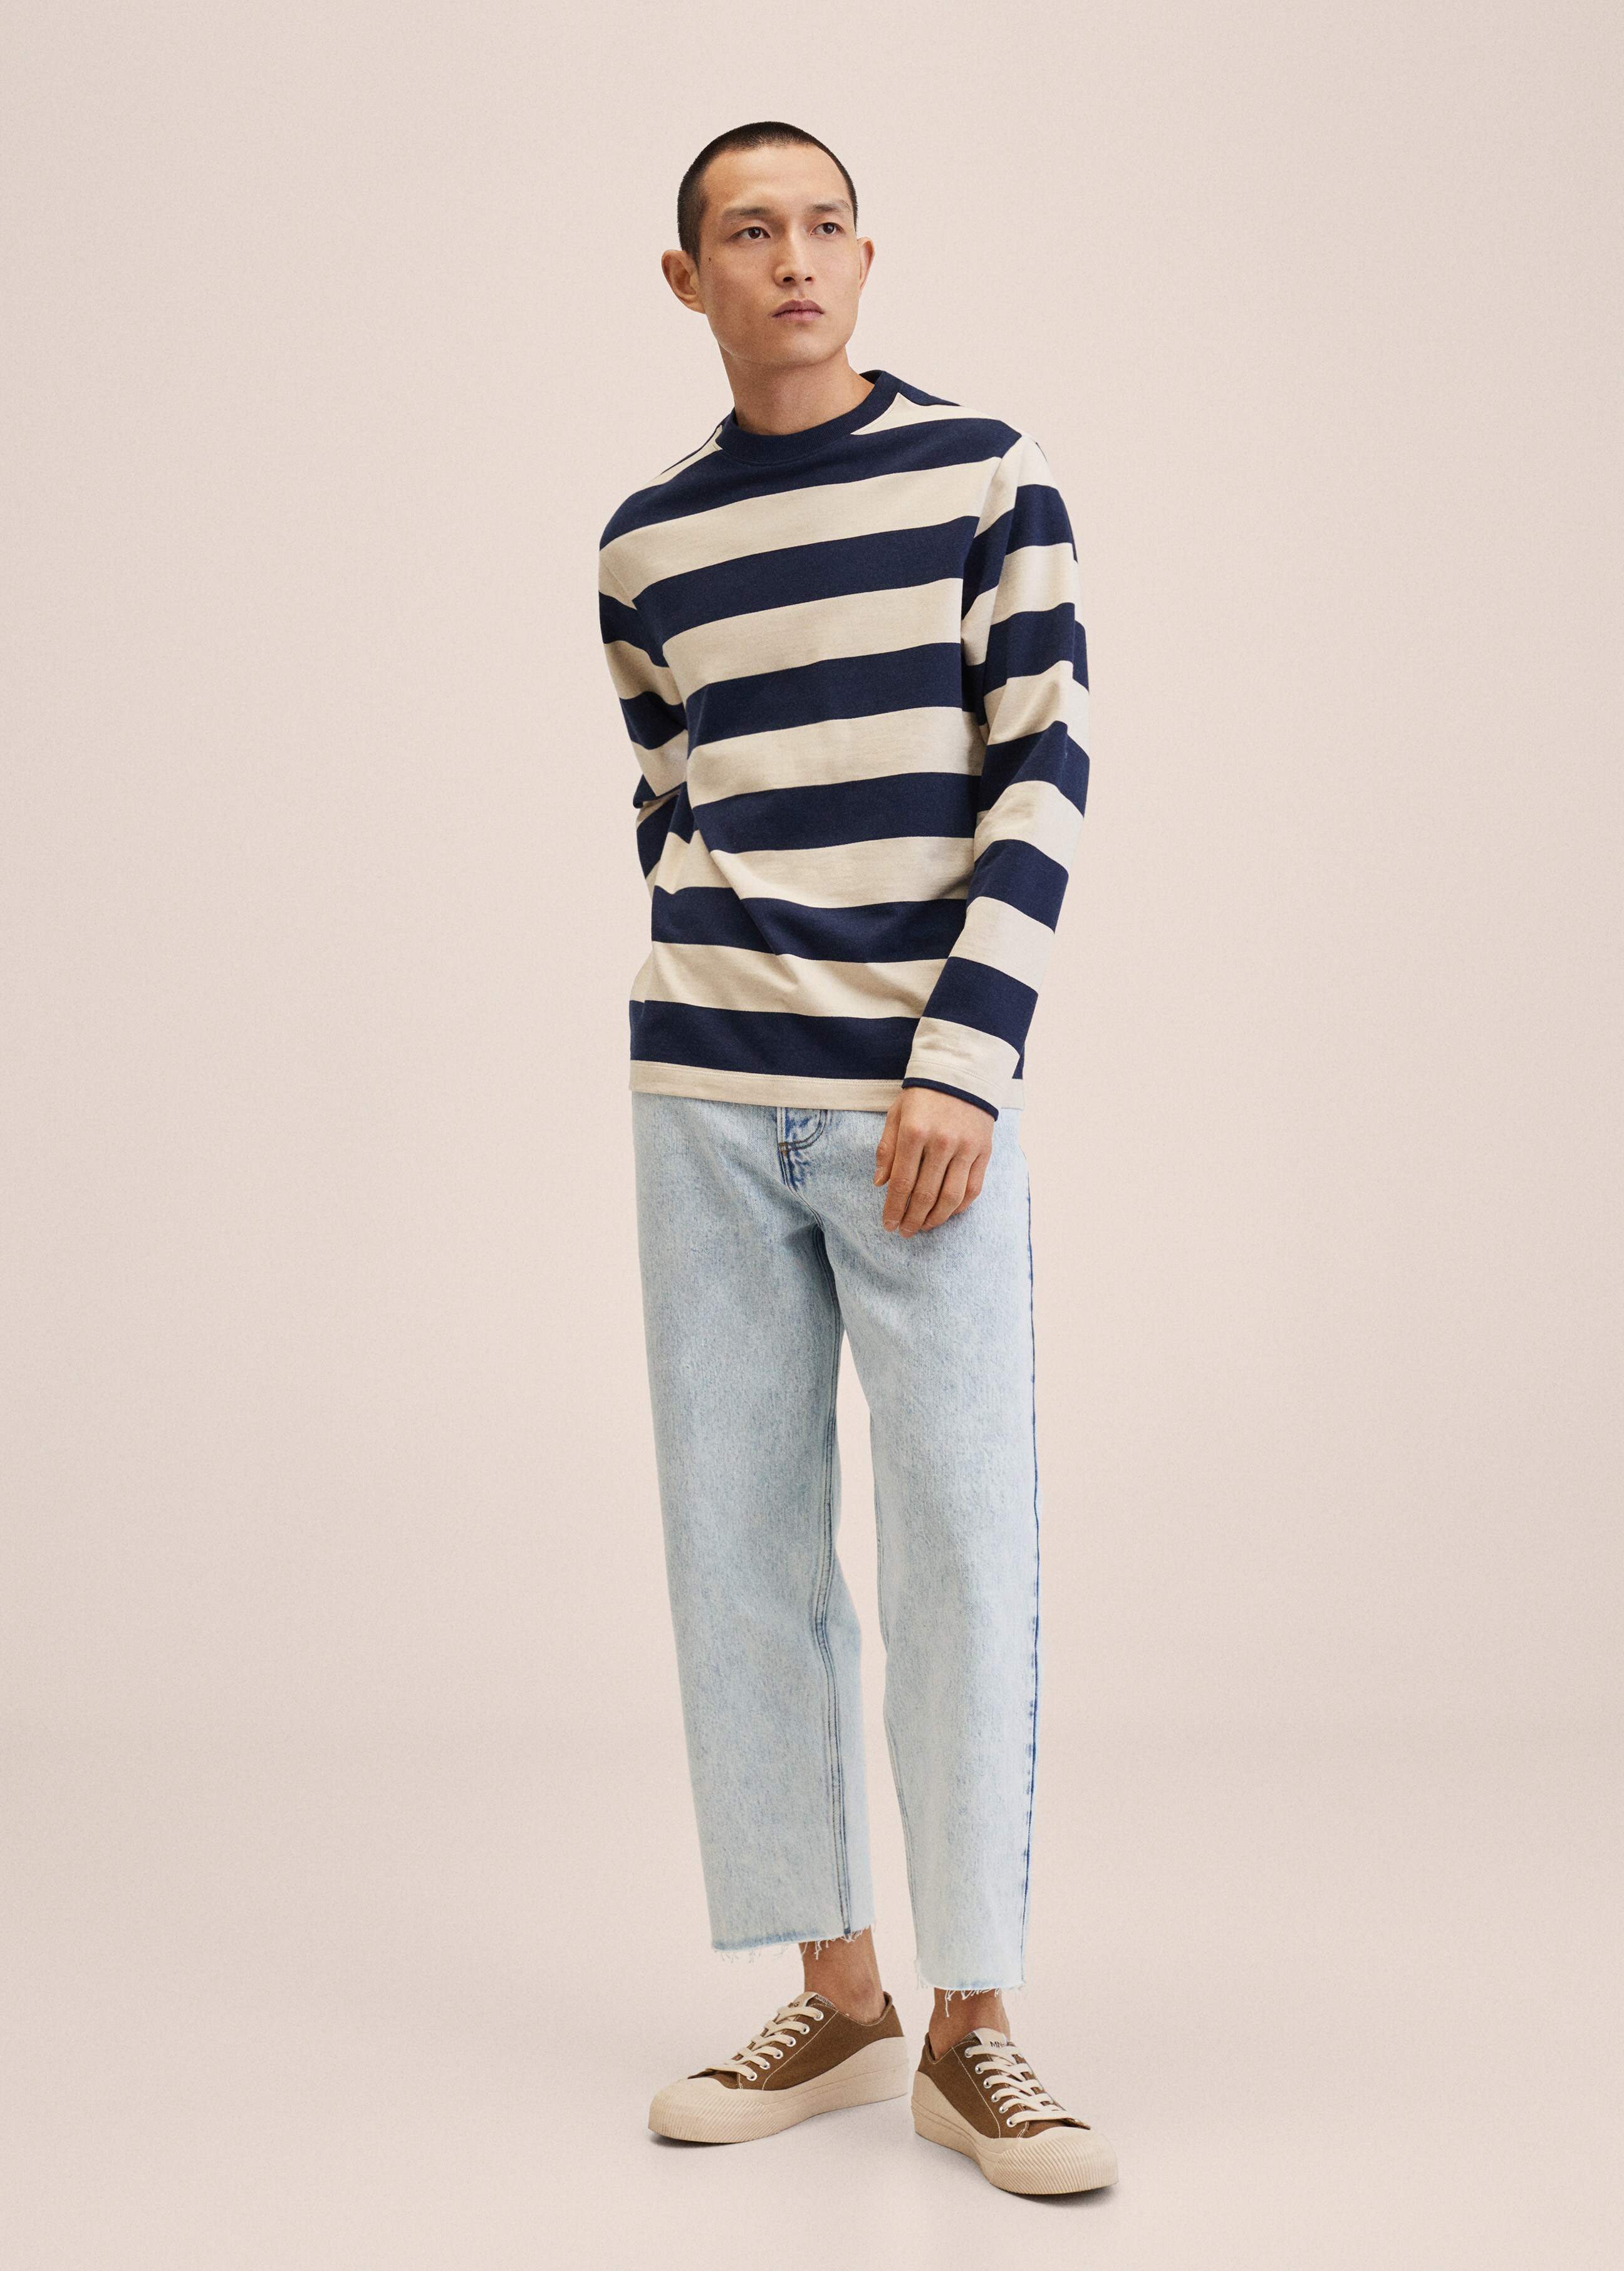 Tapered loose-fit cropped jeans  - General plane